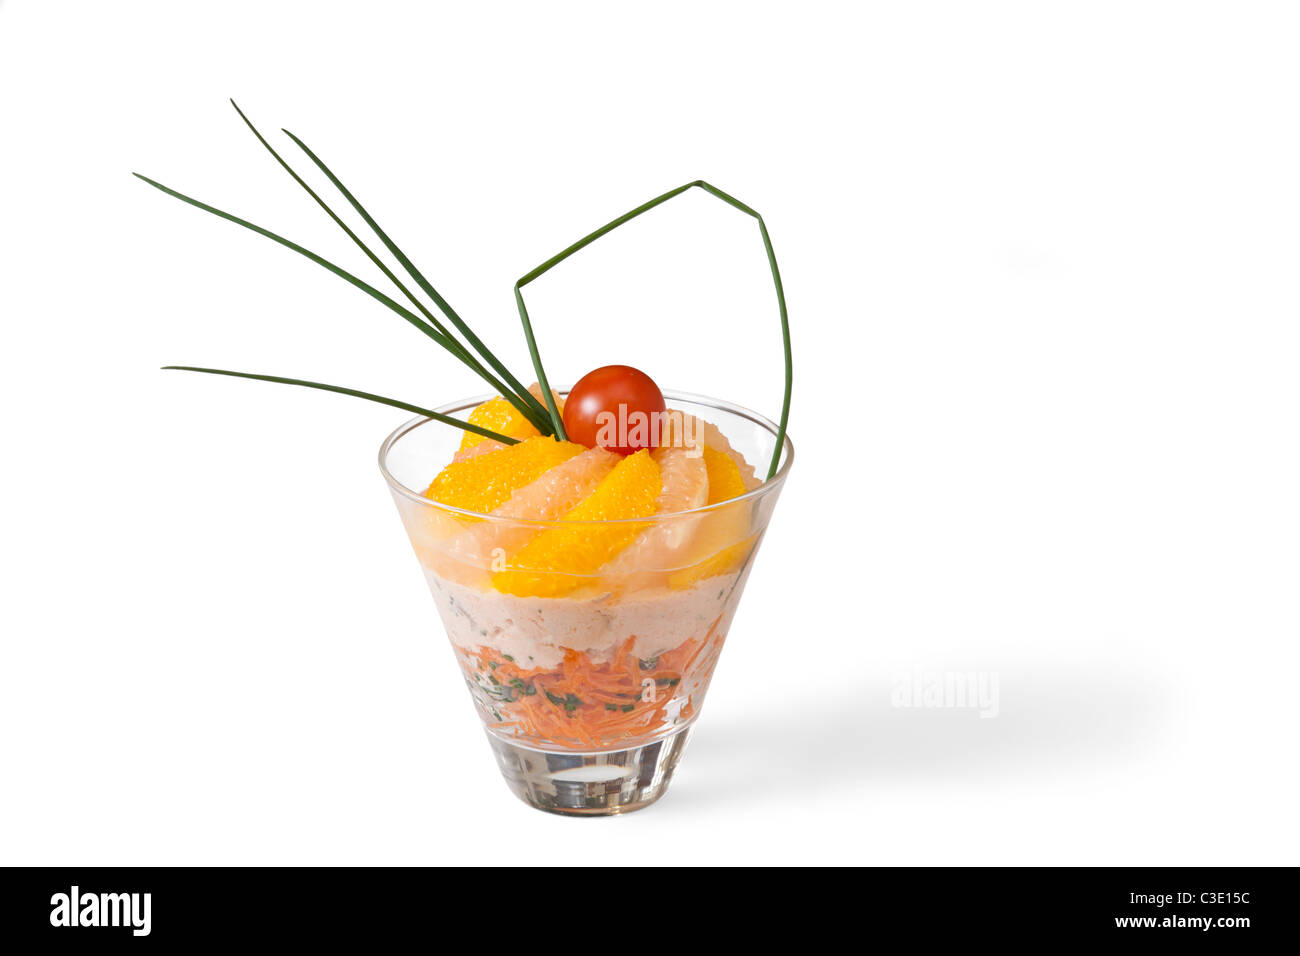 Citrus fruit and grated carrot based hors d'oeuvre, photographed in the studio. Hors-d'œuvre à base d'agrumes et de carottes. Stock Photo